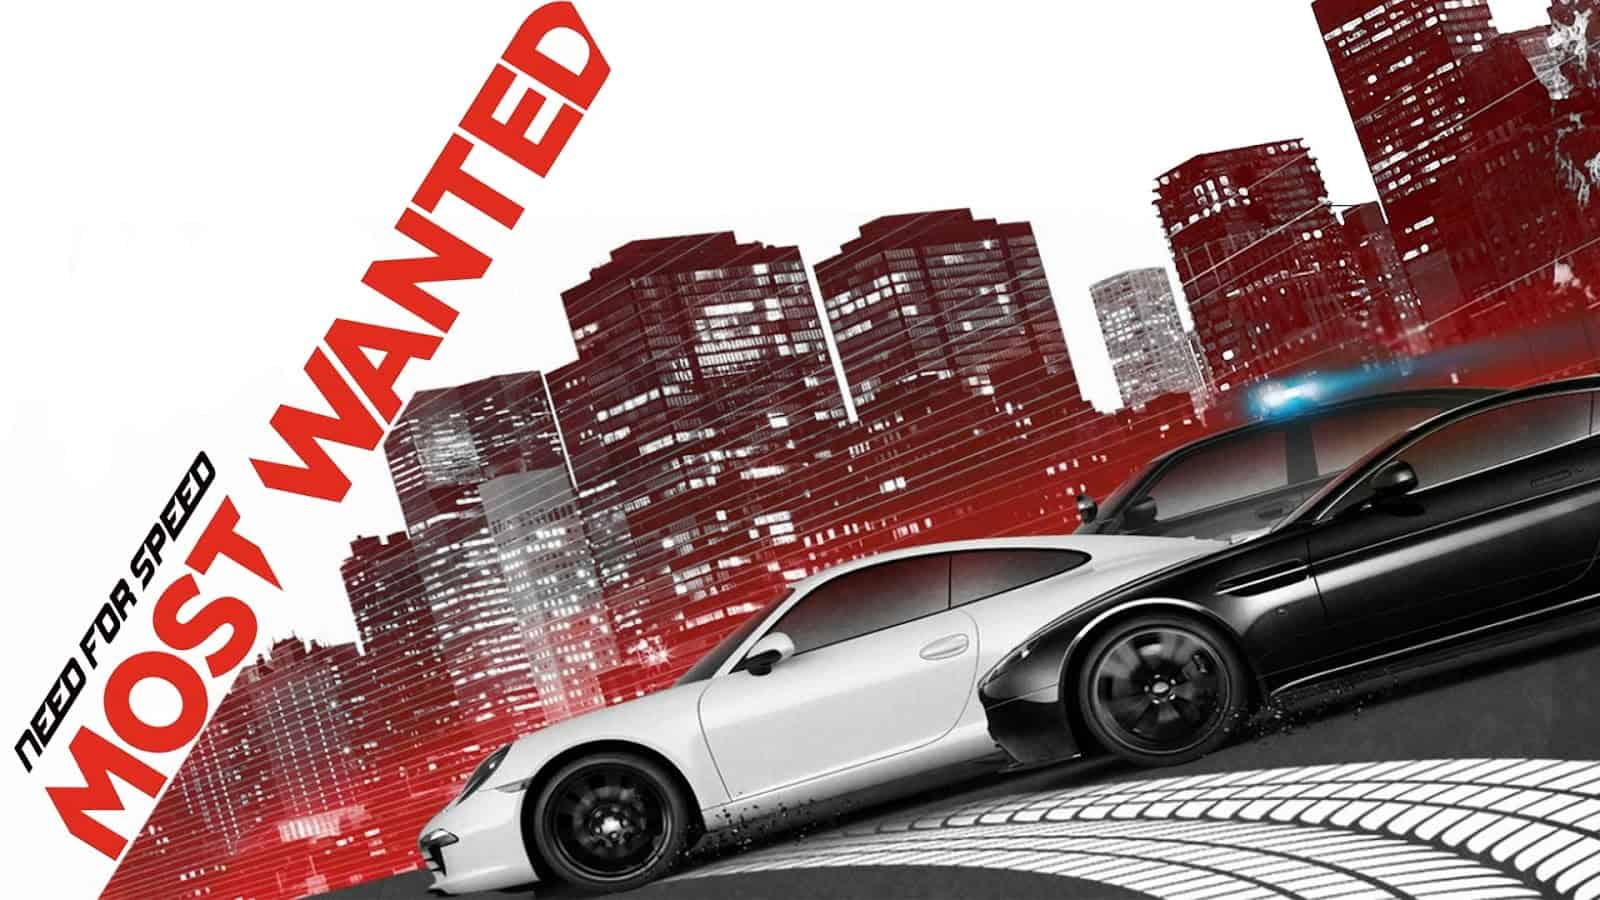 need for speed most wanted pc cheat